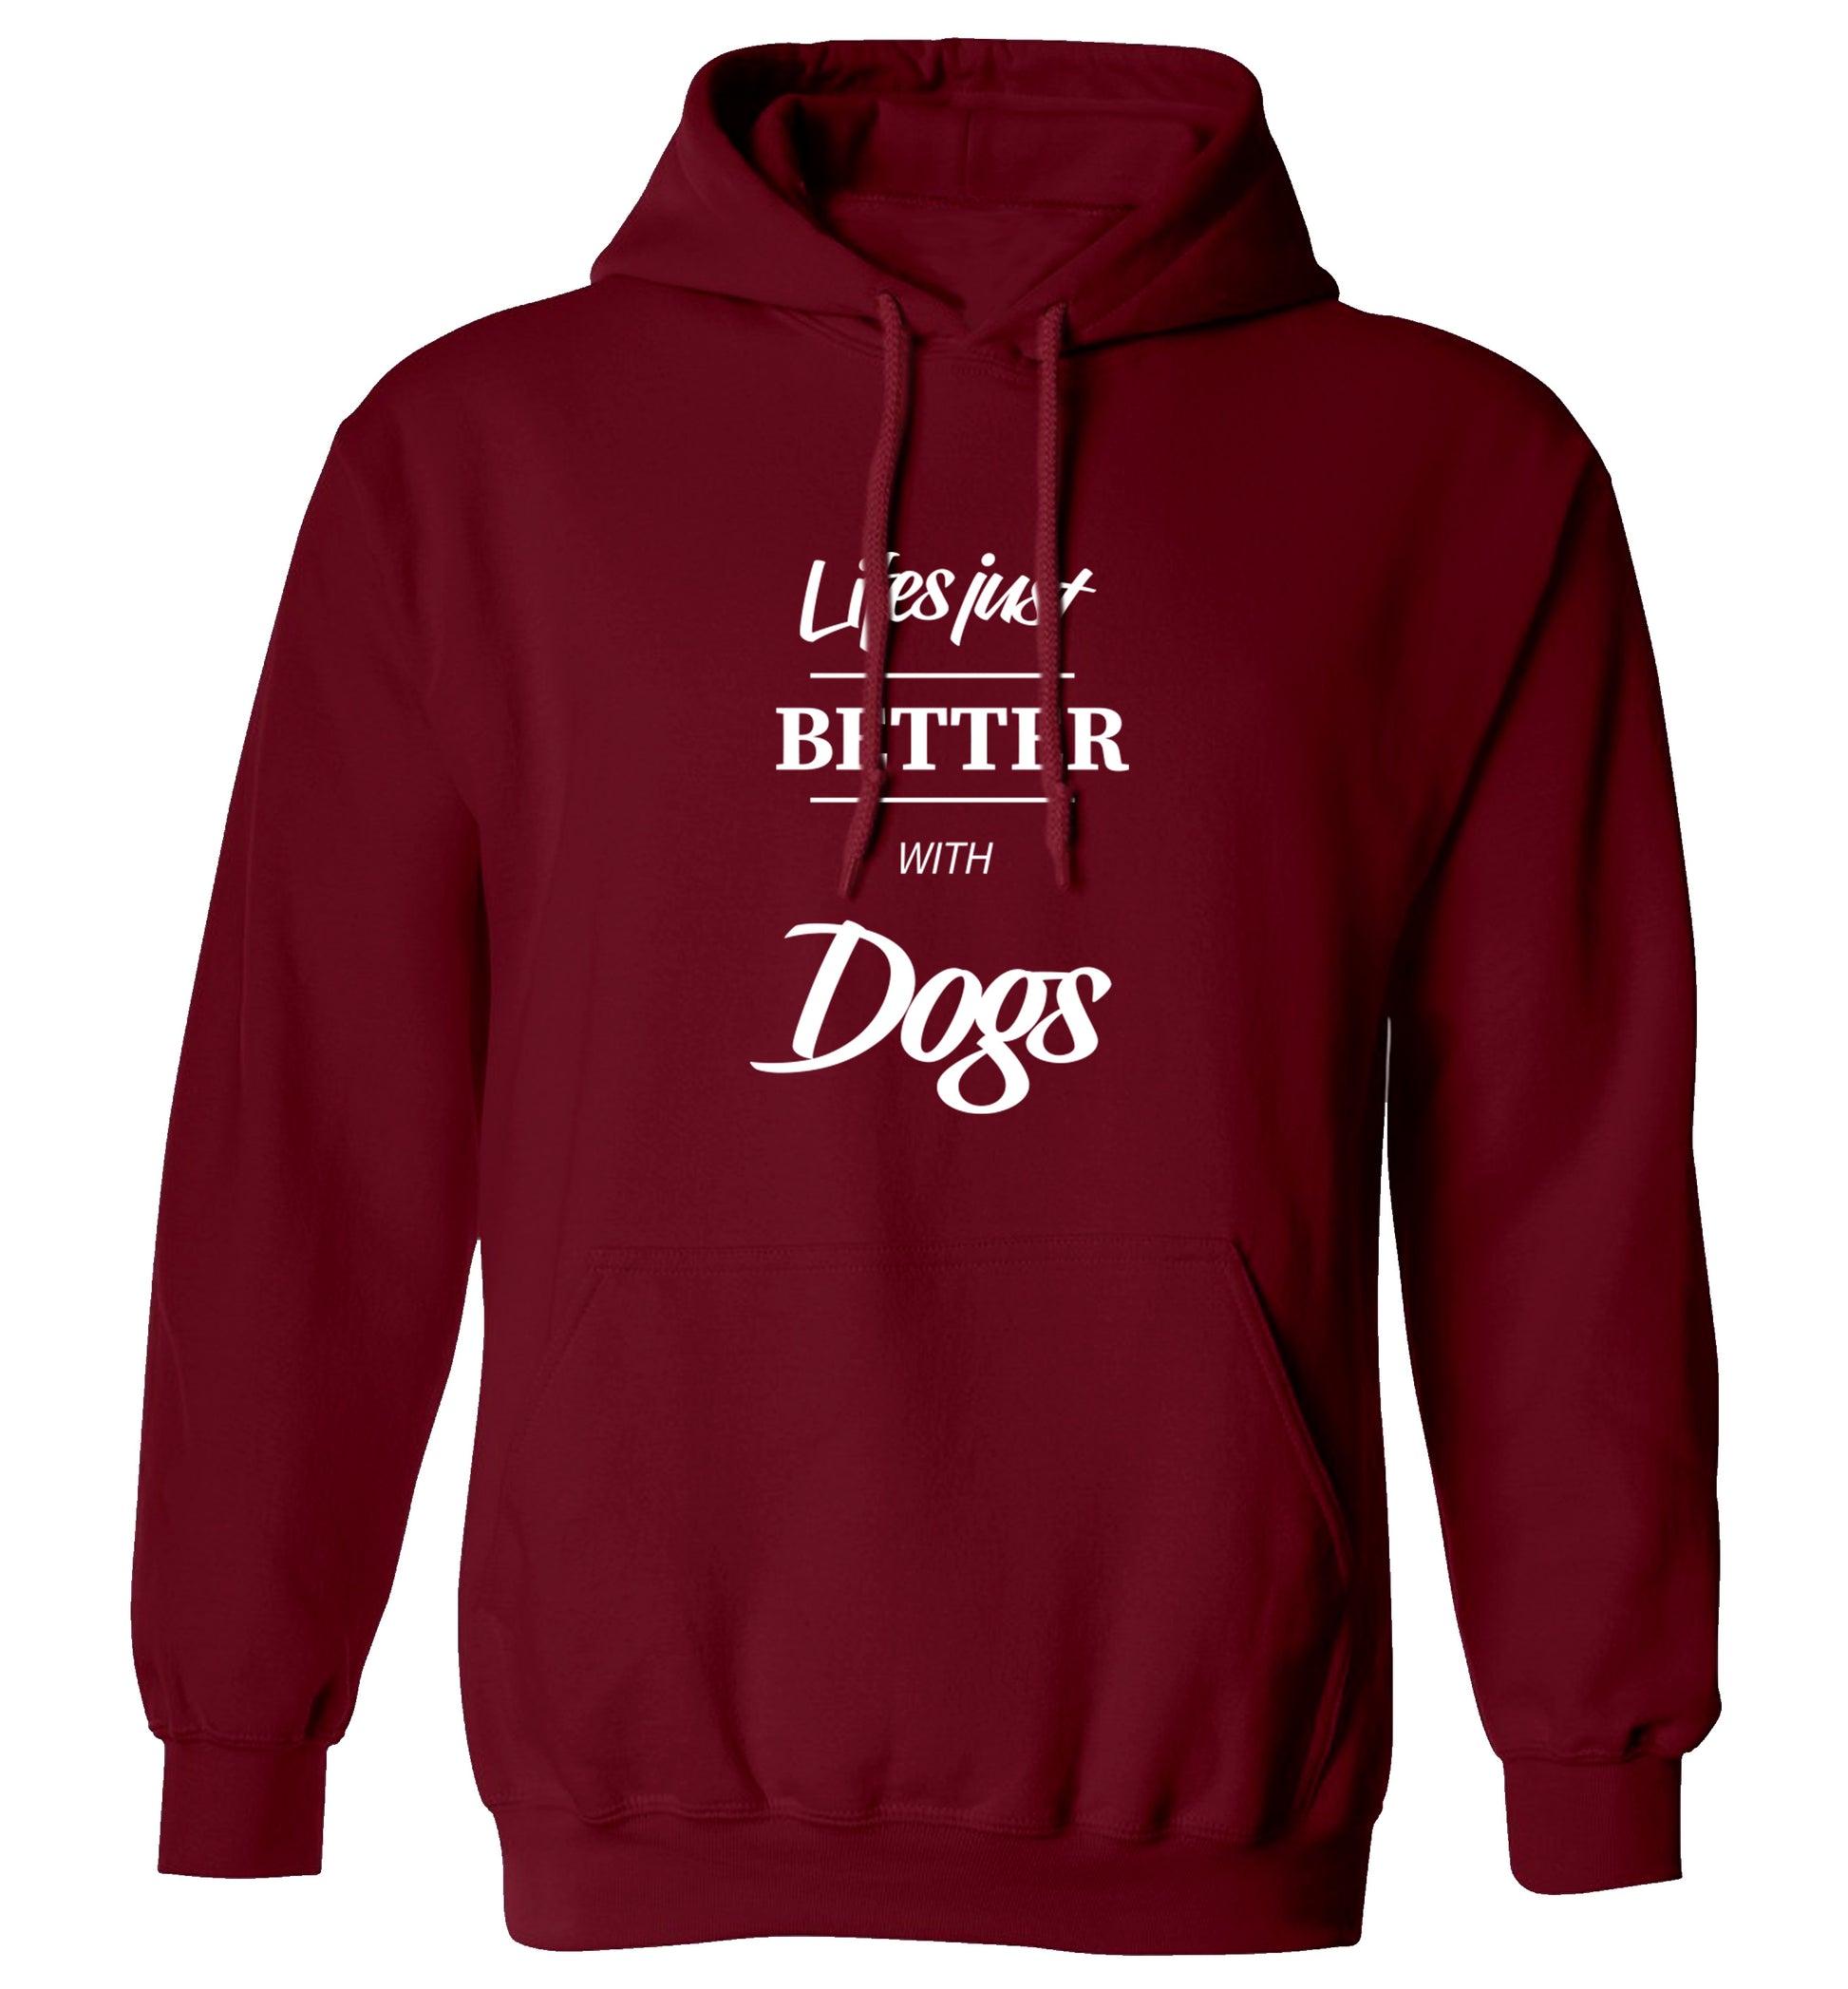 life is better with dogs adults unisex maroon hoodie 2XL